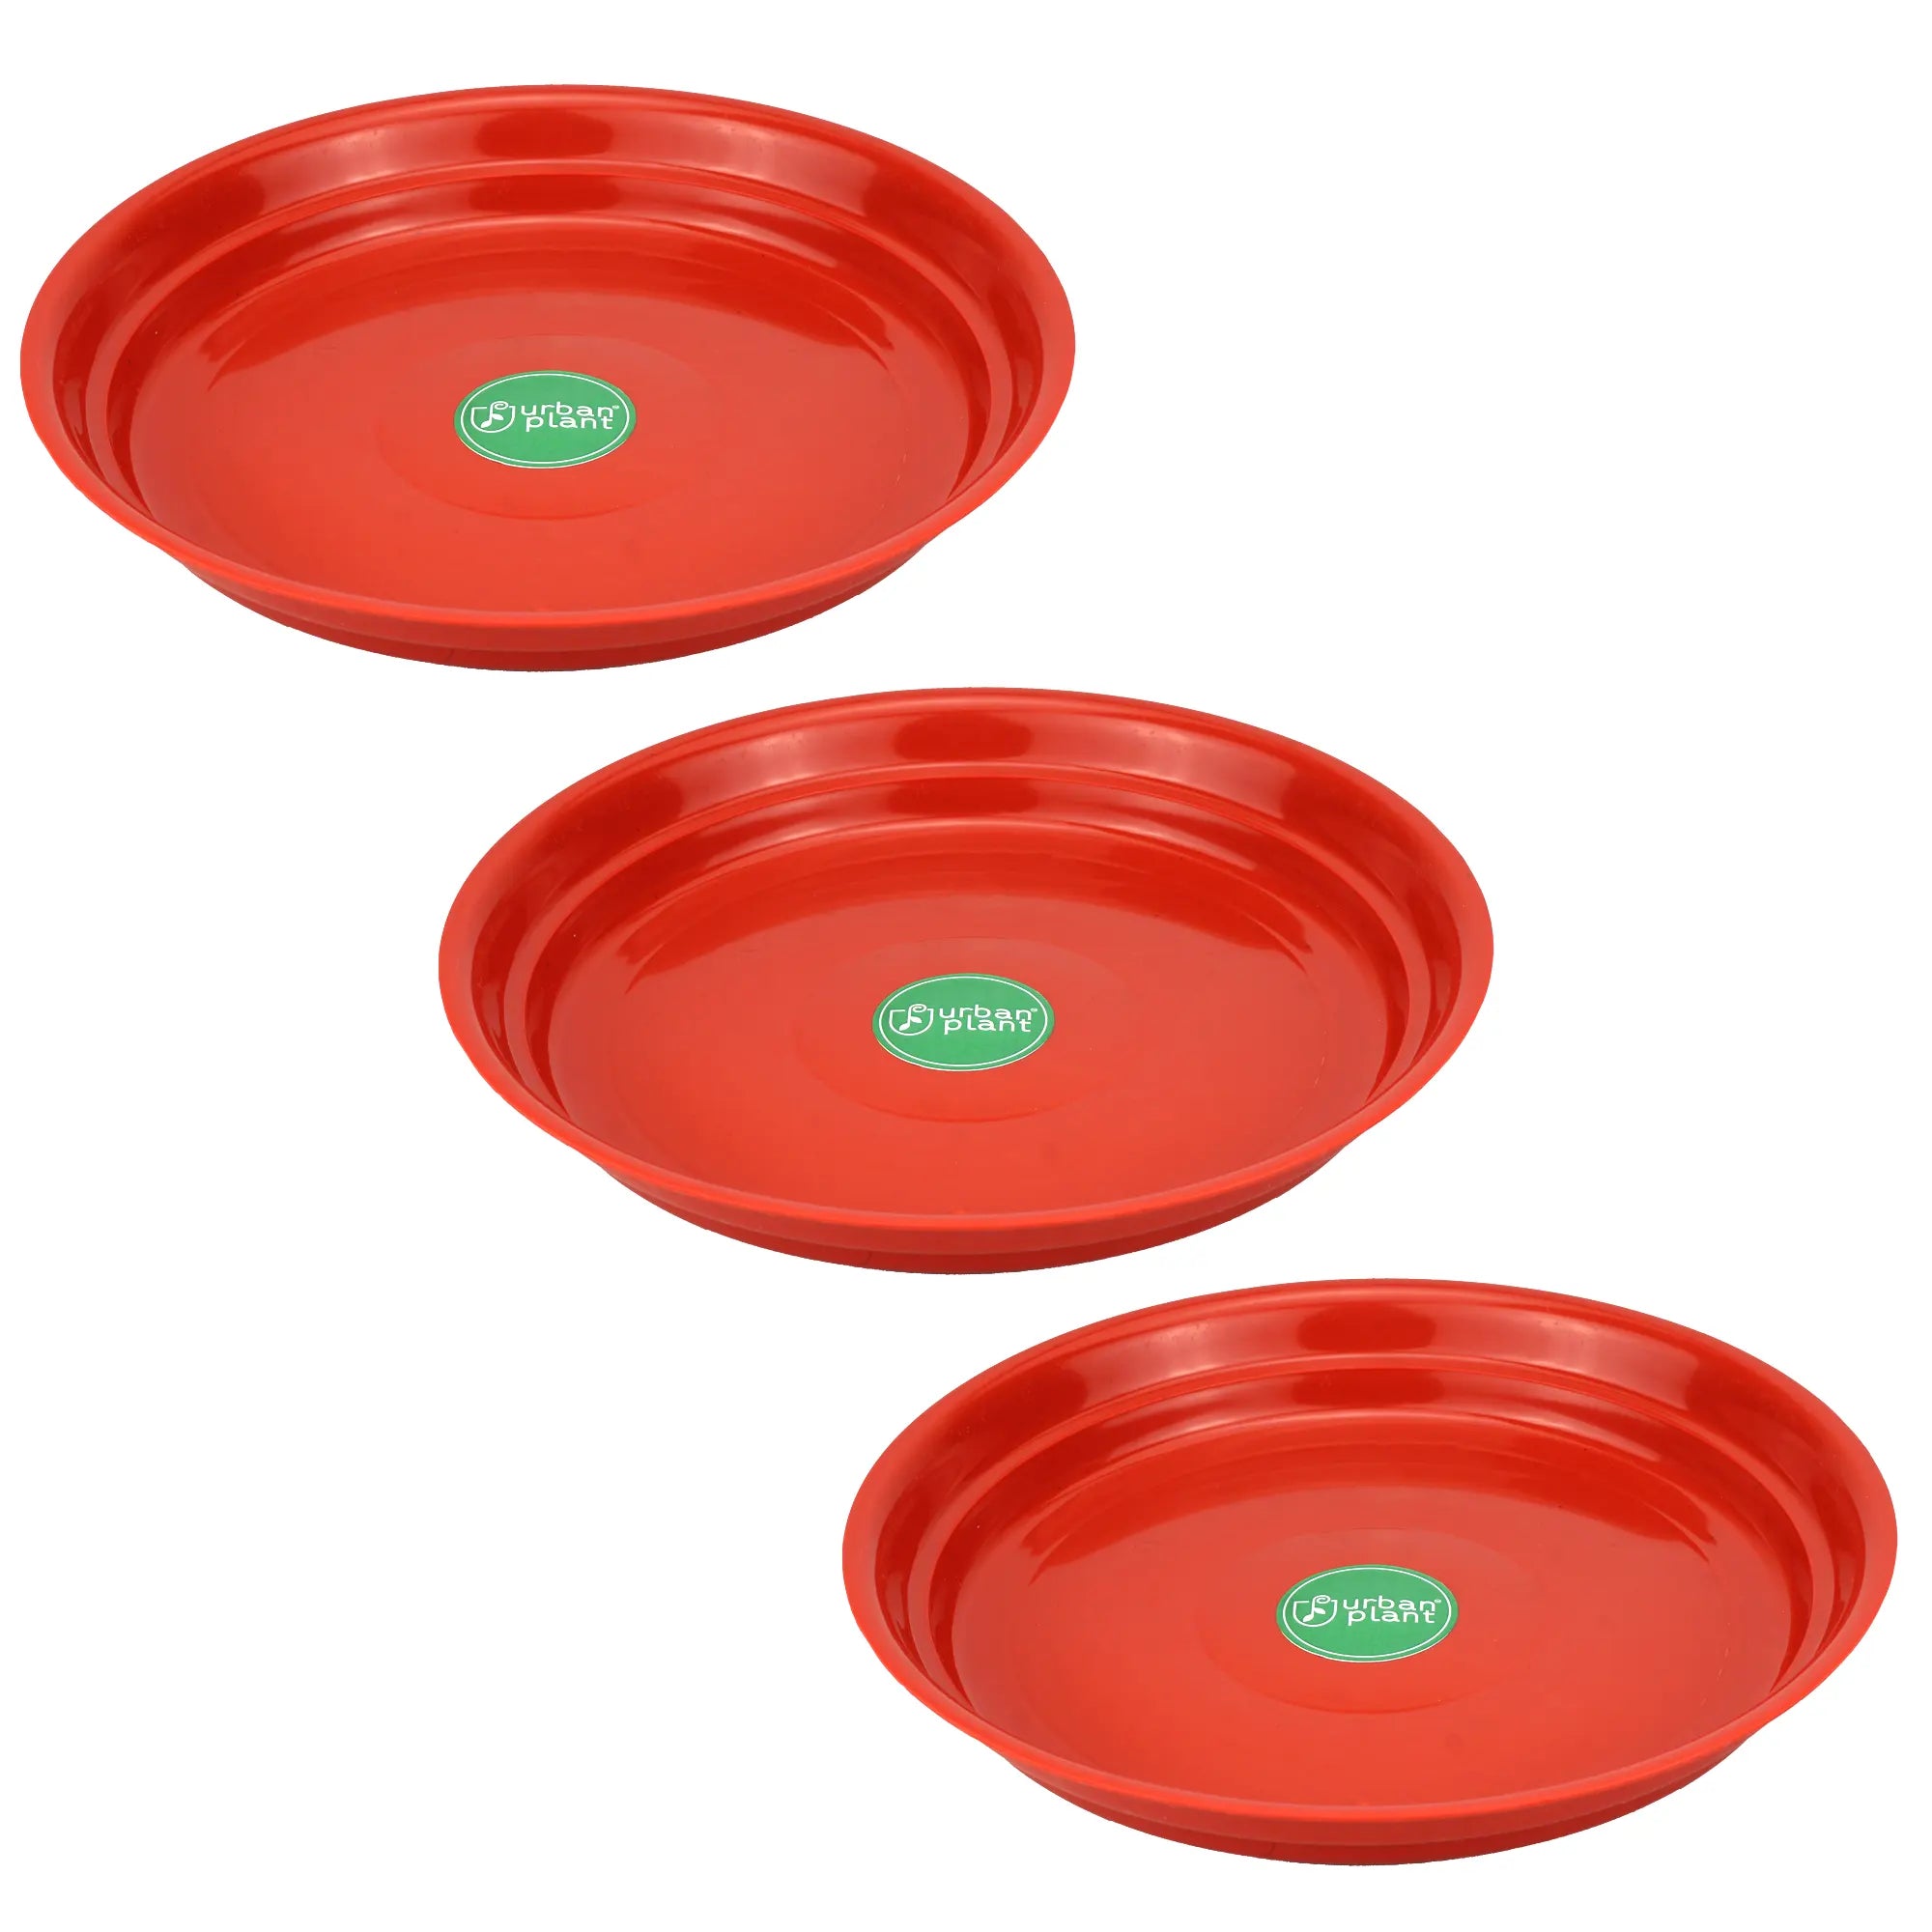 Urban Plant Round Bottom Tray (Plate/Saucer) for All Type of Pots Urban Plant 10 Inch Set of 3 